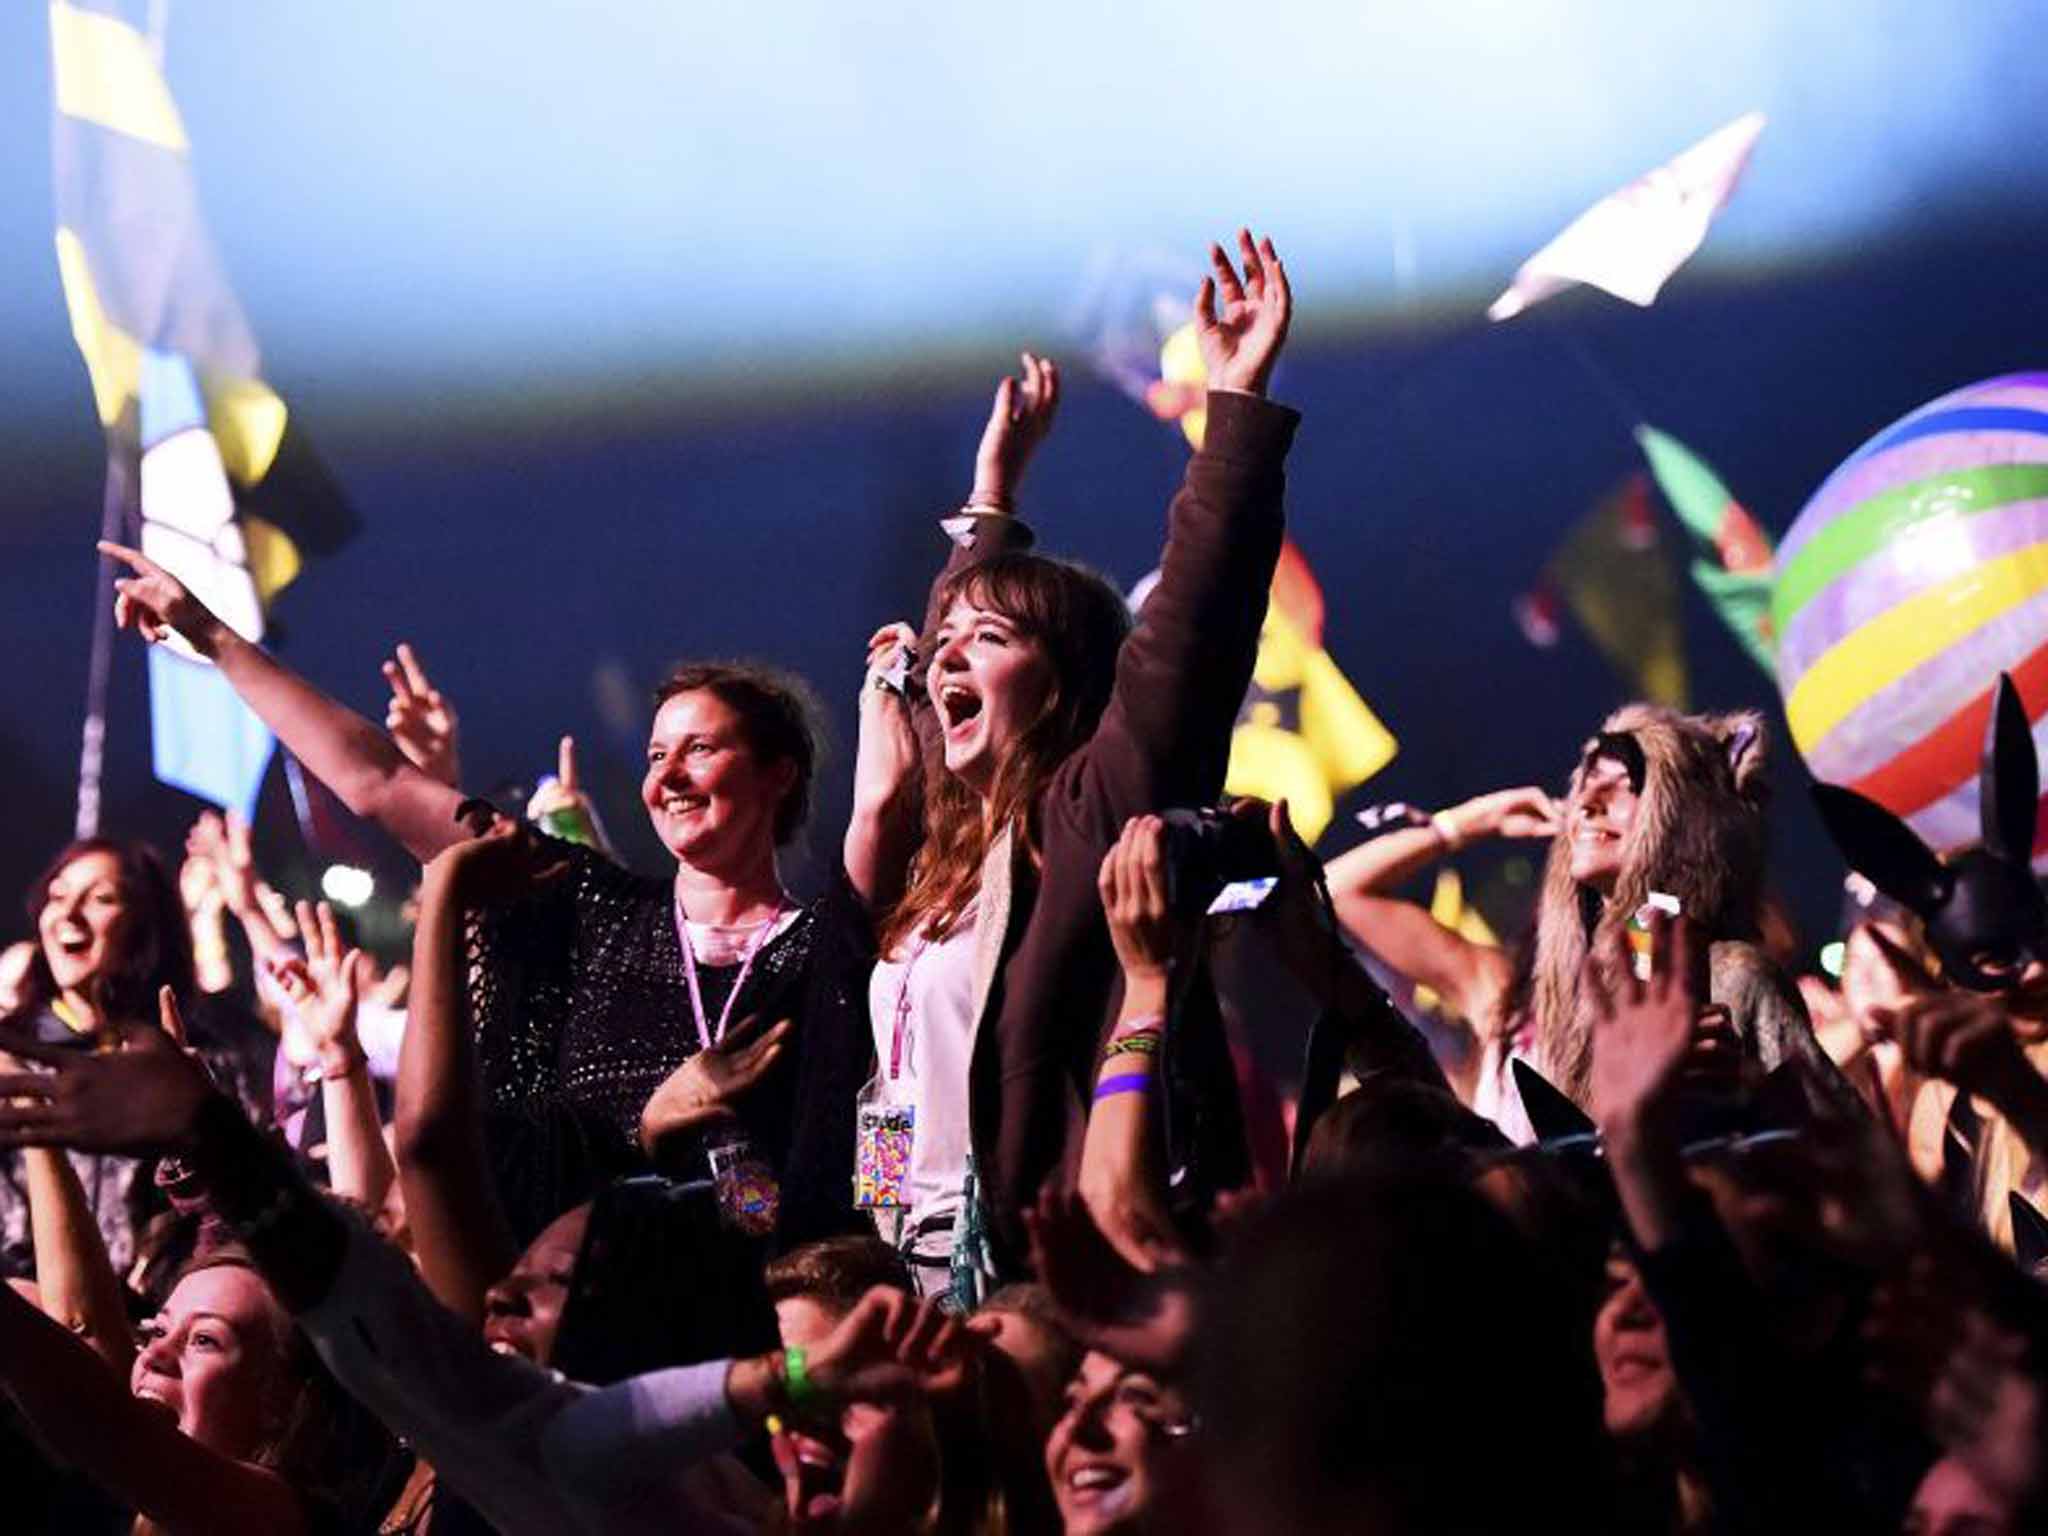 Florence + the Machine fans at the Pyramid Stage in 2015